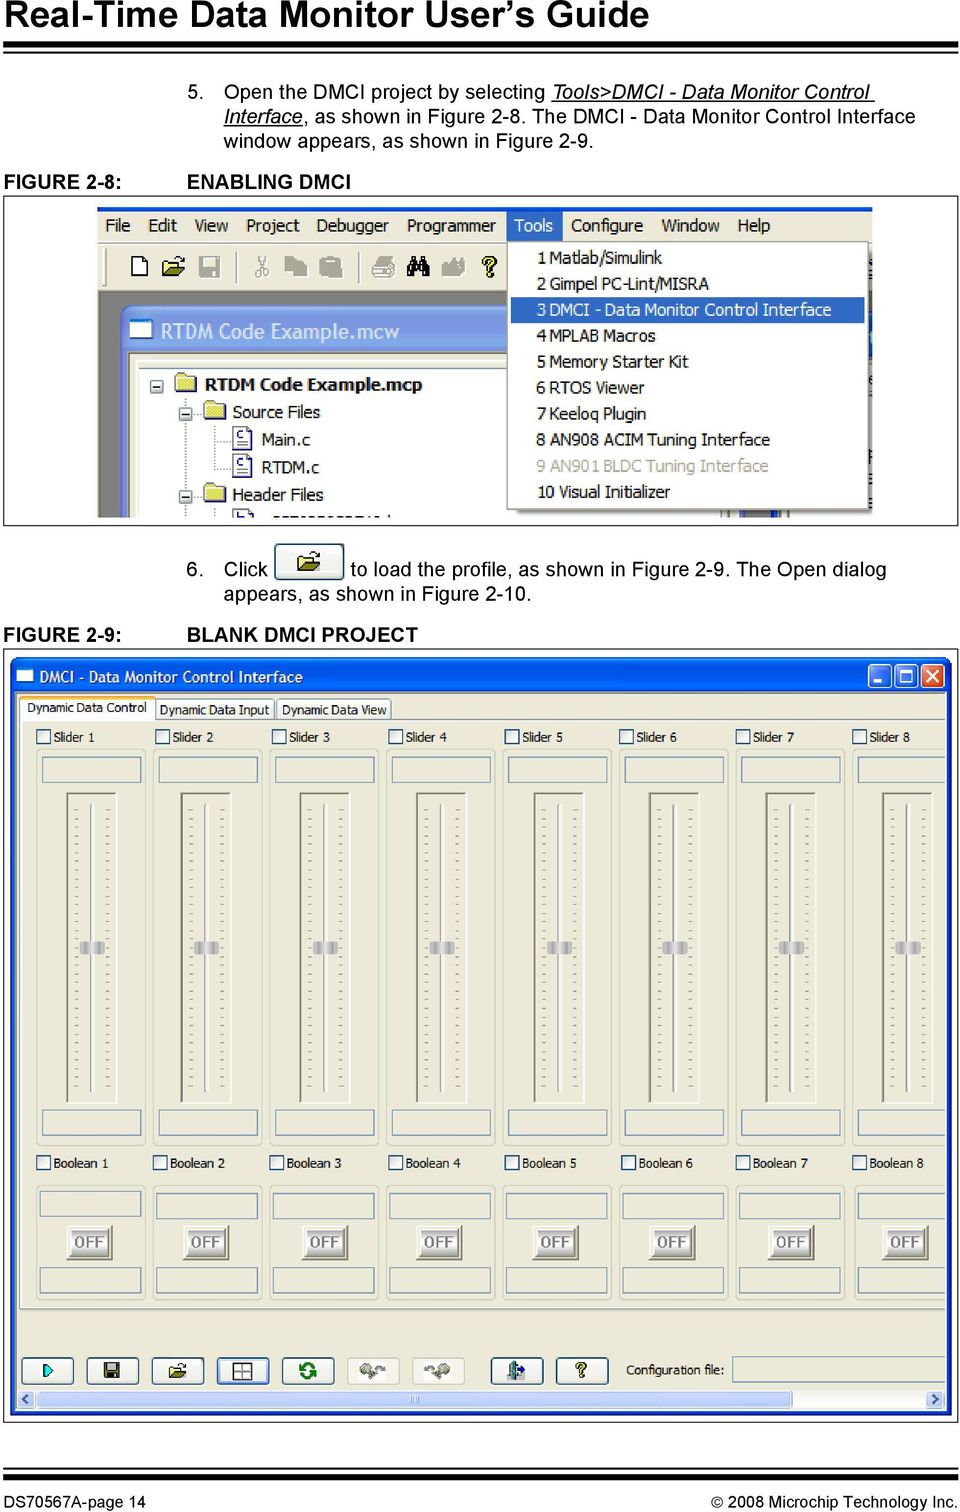 The DMCI - Data Monitor Control Interface window appears, as shown in Figure 2-9.